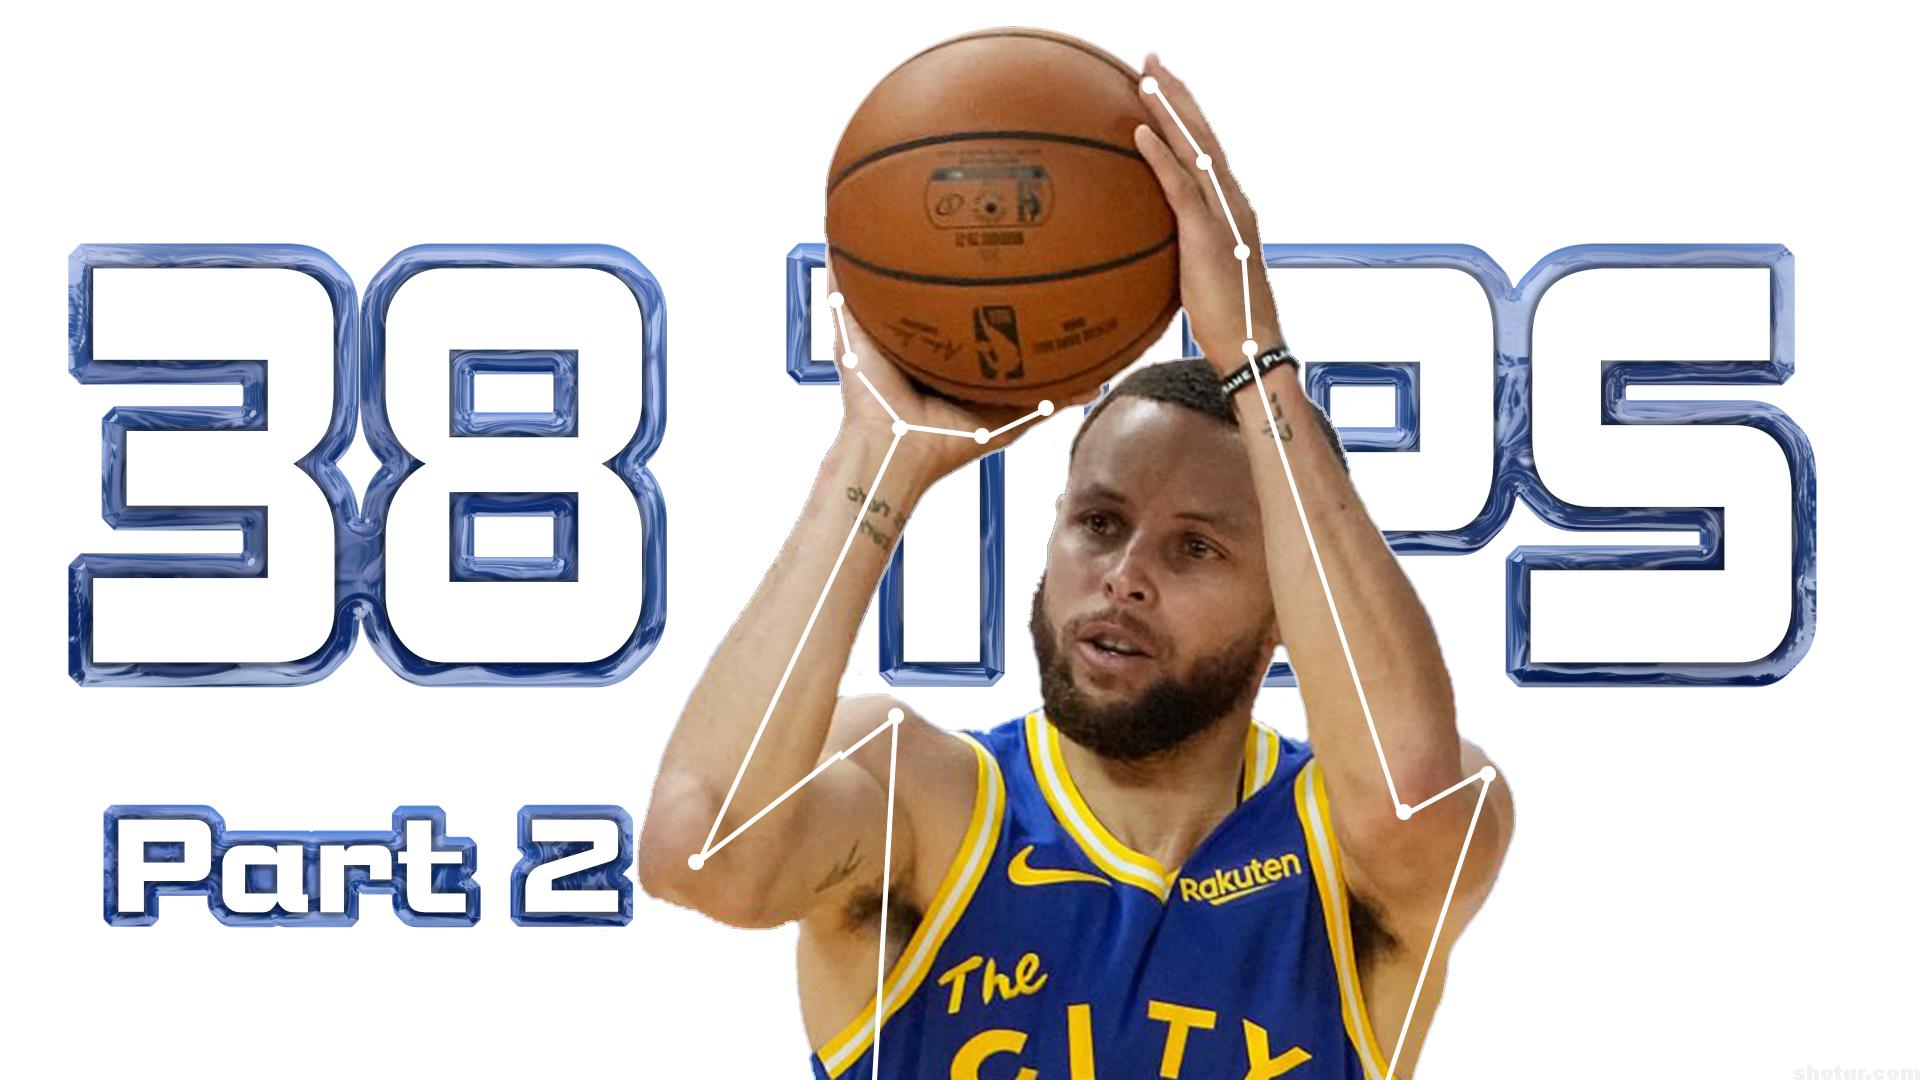 How To Stephen Curry Shooting Form Secret With 38 Tips Part 2 Shotur Basketball Jump Shot Tips